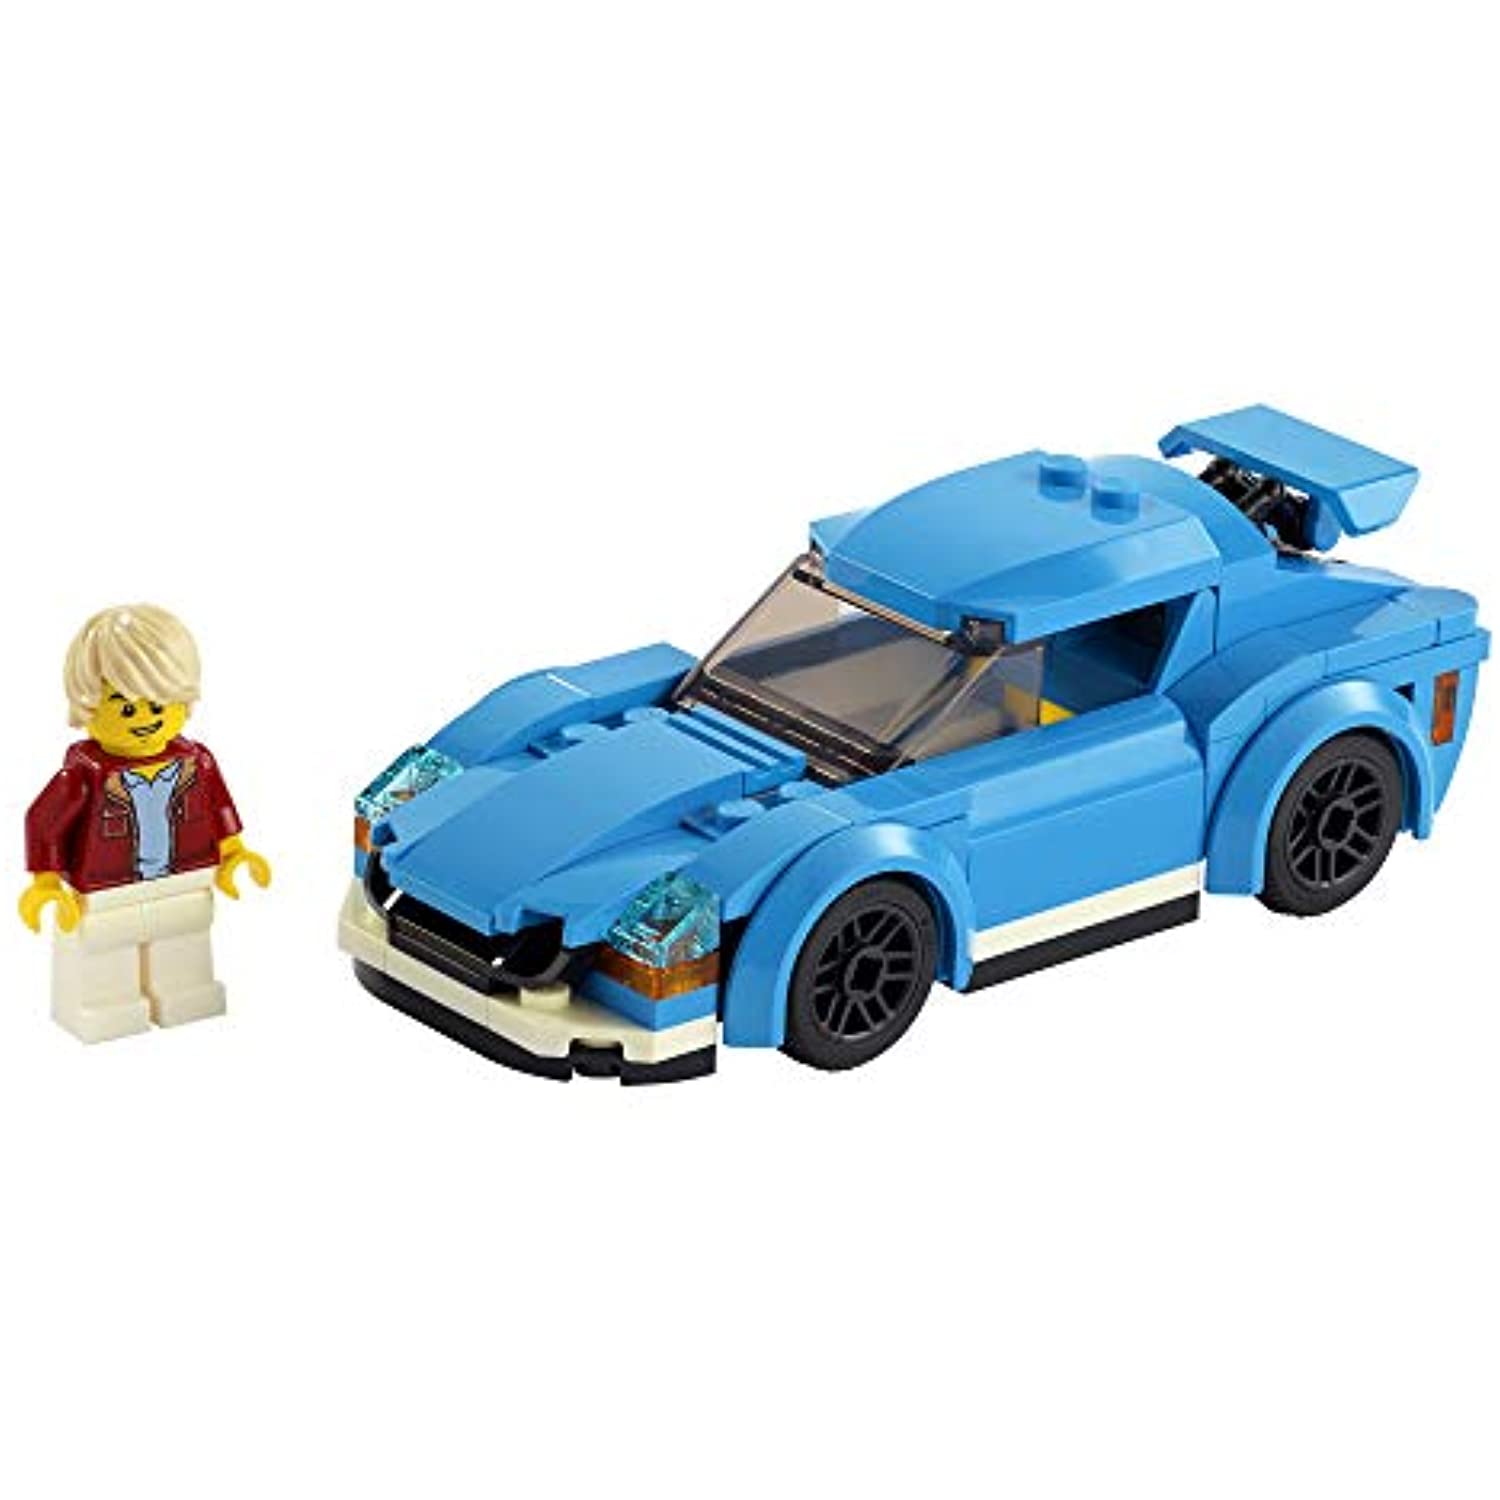 LEGO City Sports Car 60285 Building Kit; Playset for Kids, New 2021 (89 ...